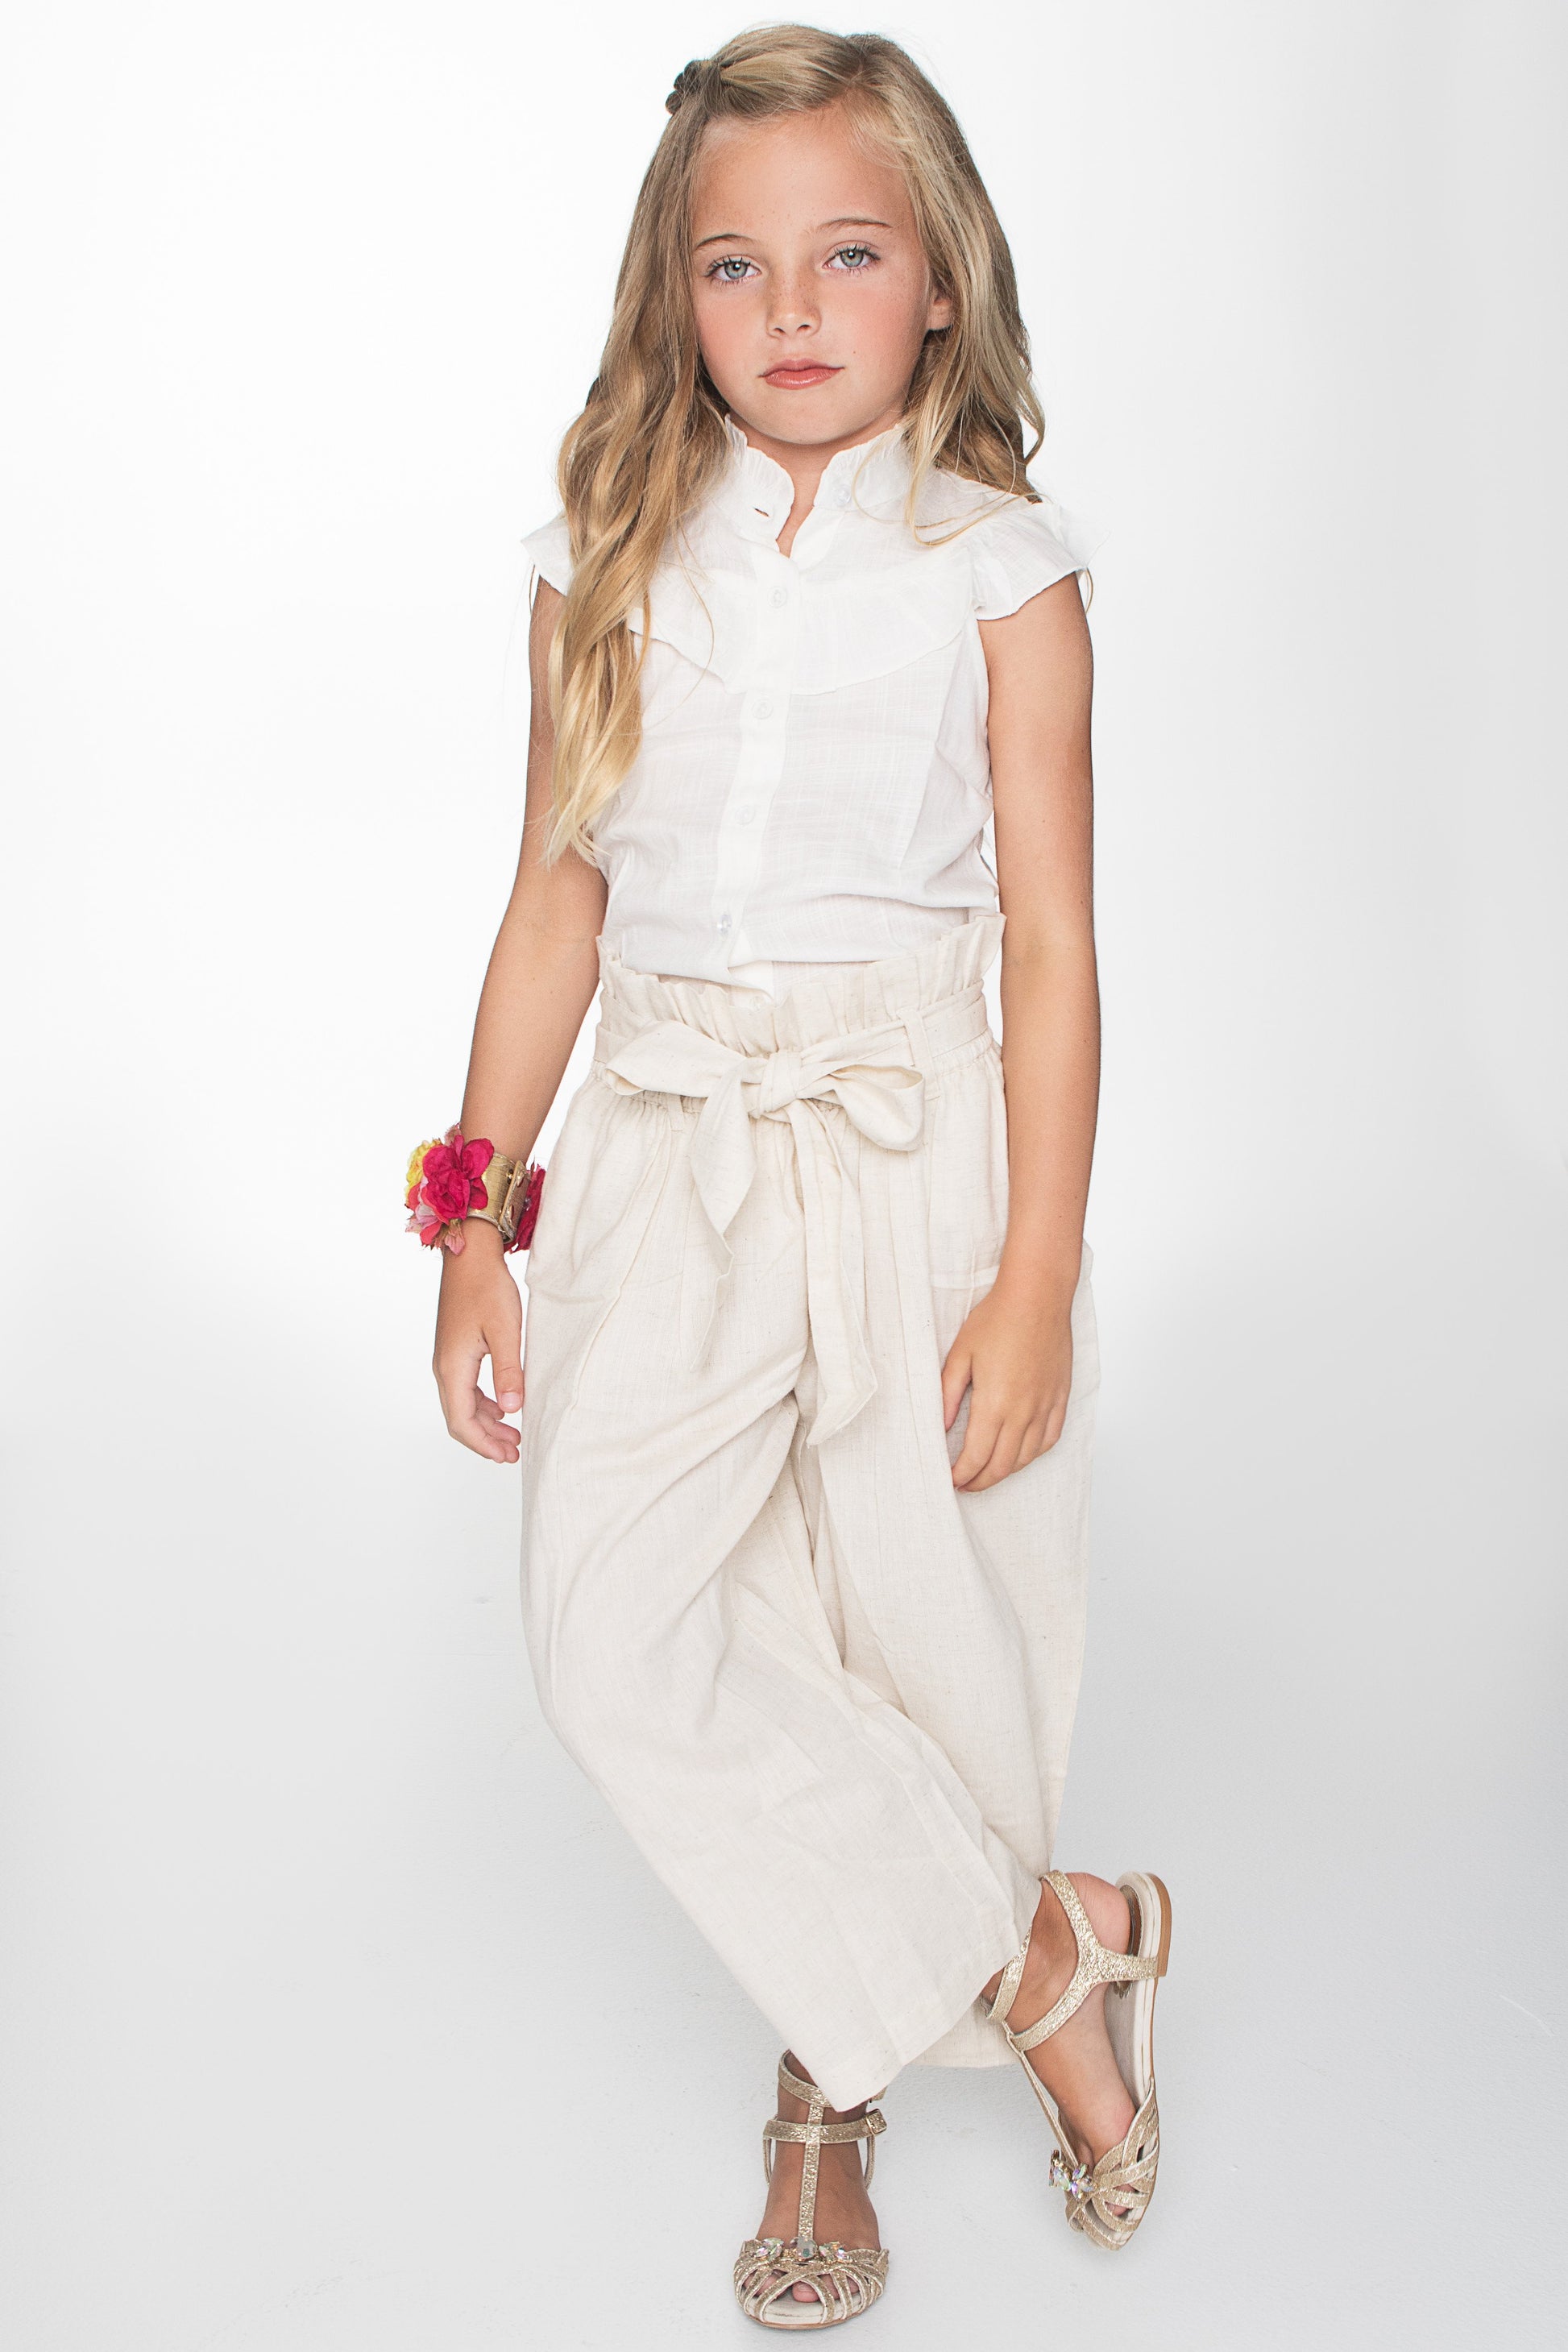 White Frill Top and Paper Bag Beige Pants 2pc. Set